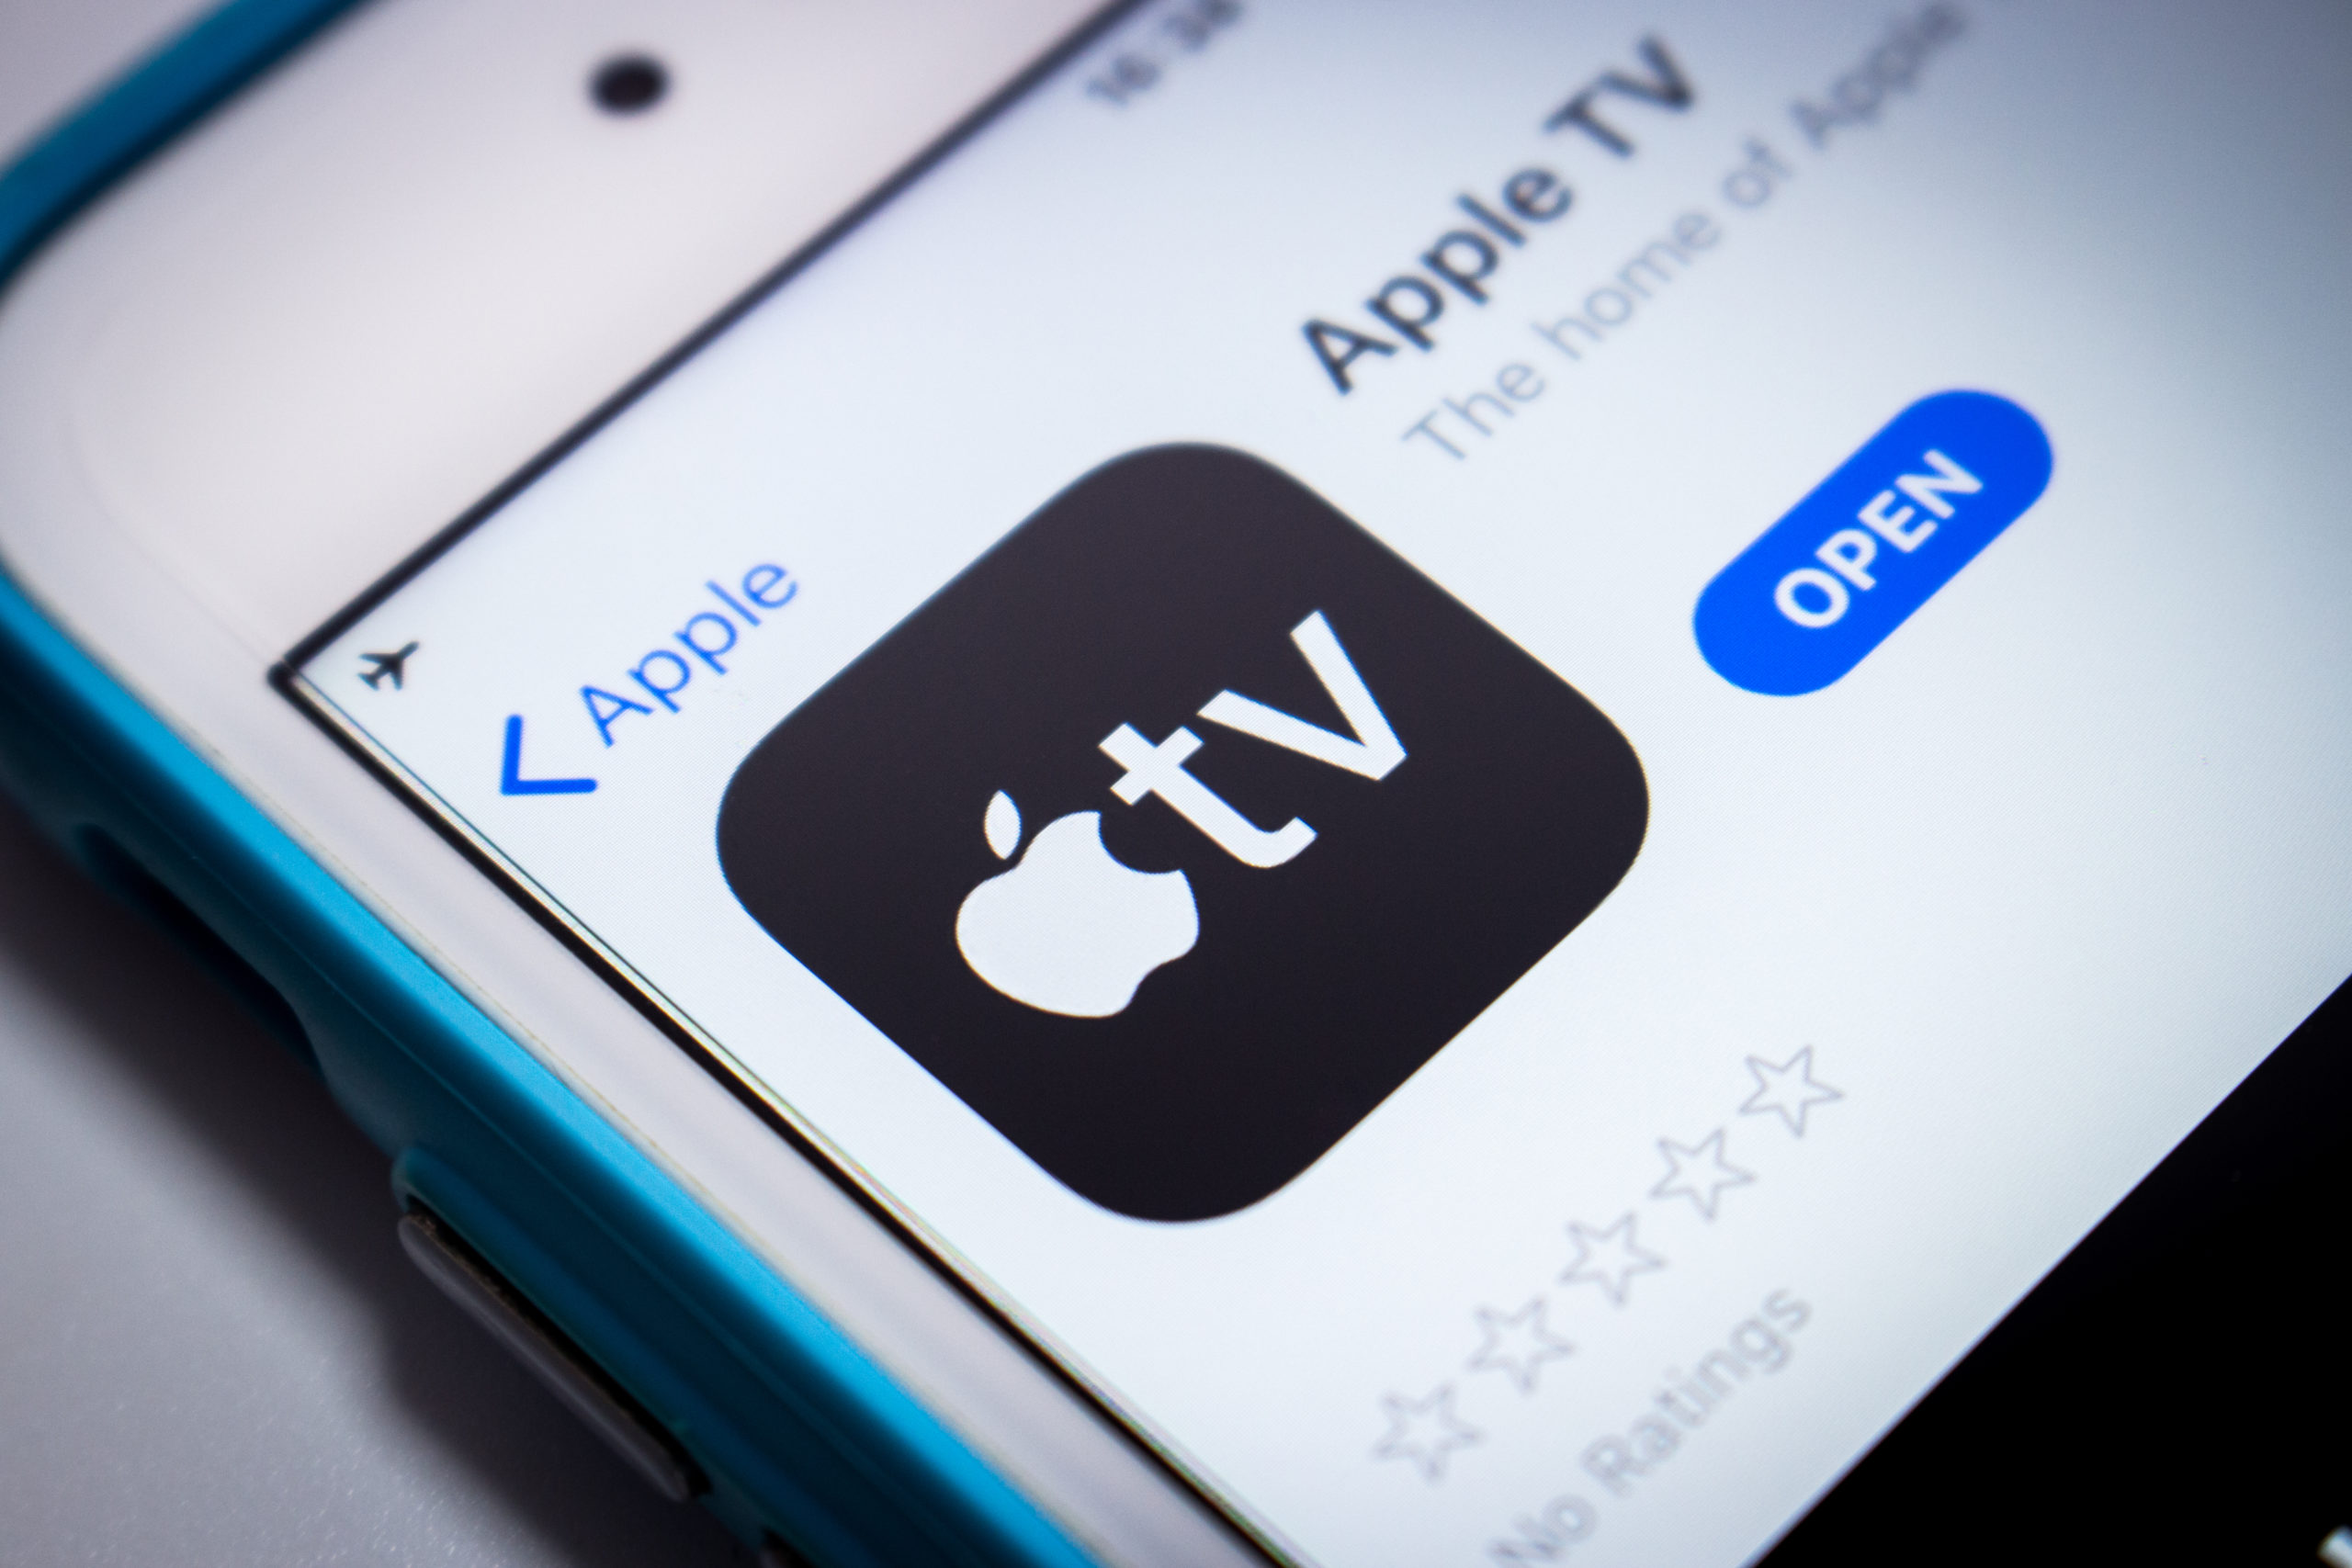 Apple music, apps, tv shows, films, and more